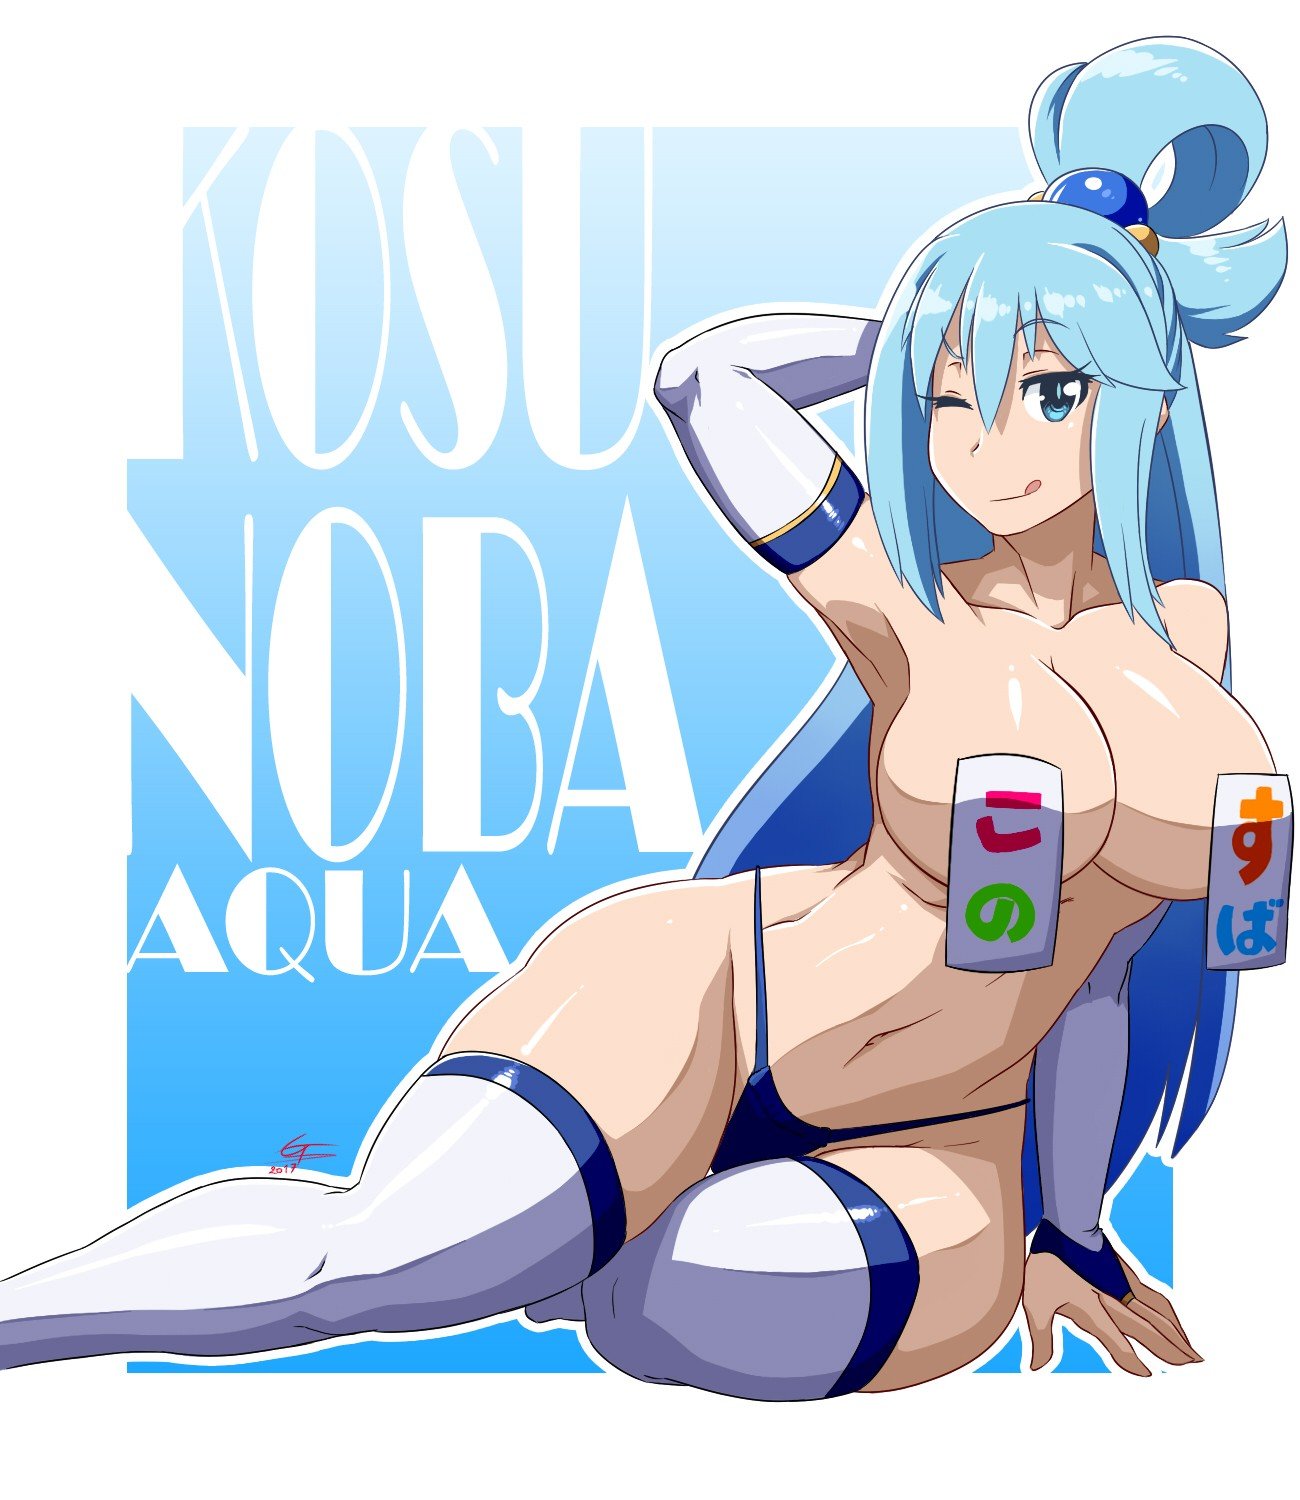 Photo by the5impleton with the username @the5impleton, who is a verified user,  February 14, 2018 at 10:31 PM and the text says 'gblastman:

Aqua - Kono Subarashii Sekai ni Shukufuku woFirst time drawing this gal, gotta admit she is quite fun to draw, more when we add extra thiccness to certain “aspects” of her, we can say that she “leveled up” way too much that now she has really..'